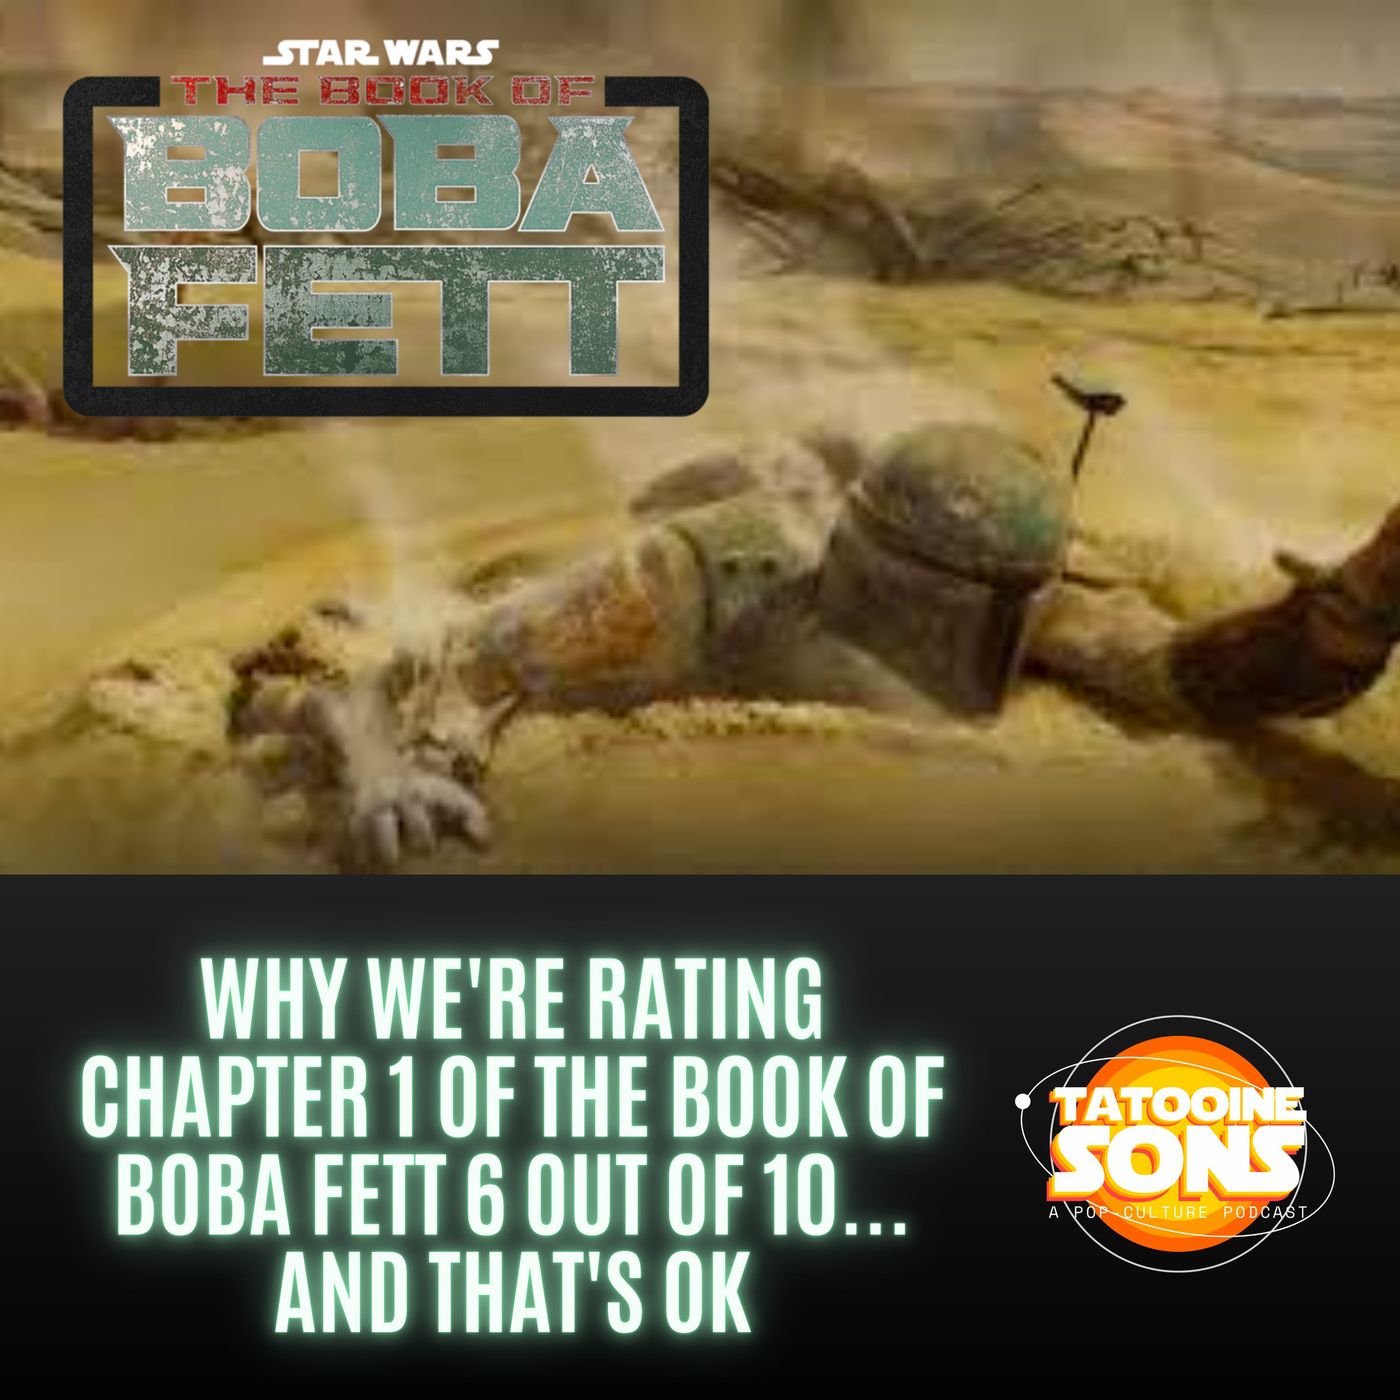 Why We're Rating Chapter 1 of The Book of Boba Fett a 6 out of 10...and That's OK